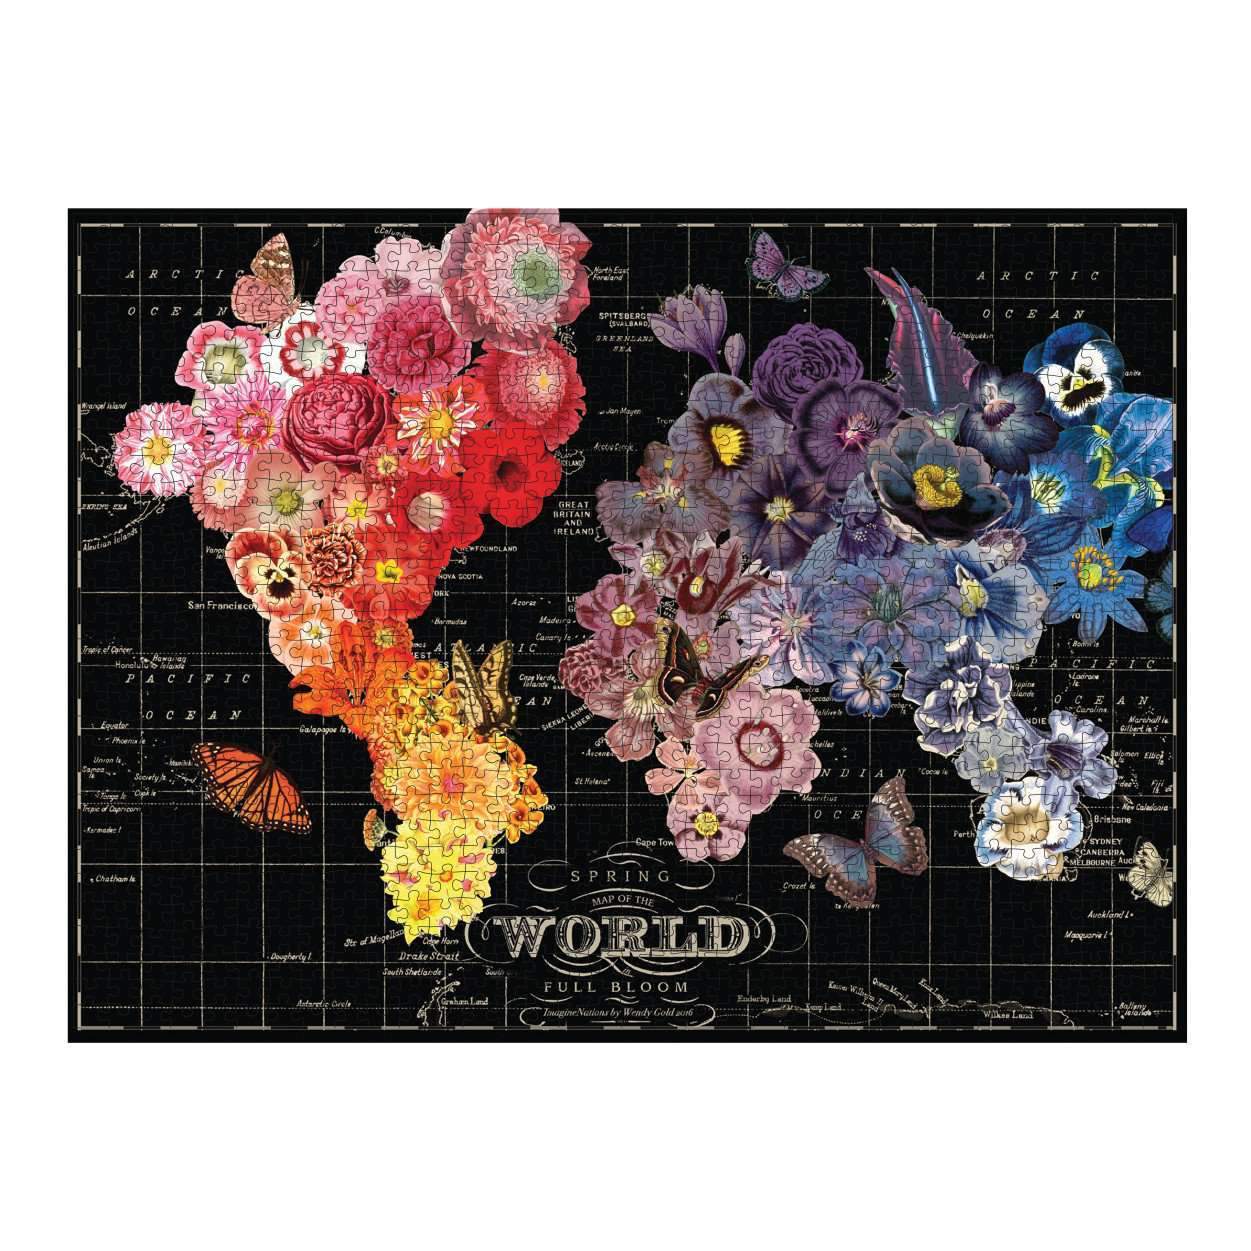 Wendy Gold Full Bloom - 1000 Piece Jigsaw Puzzle